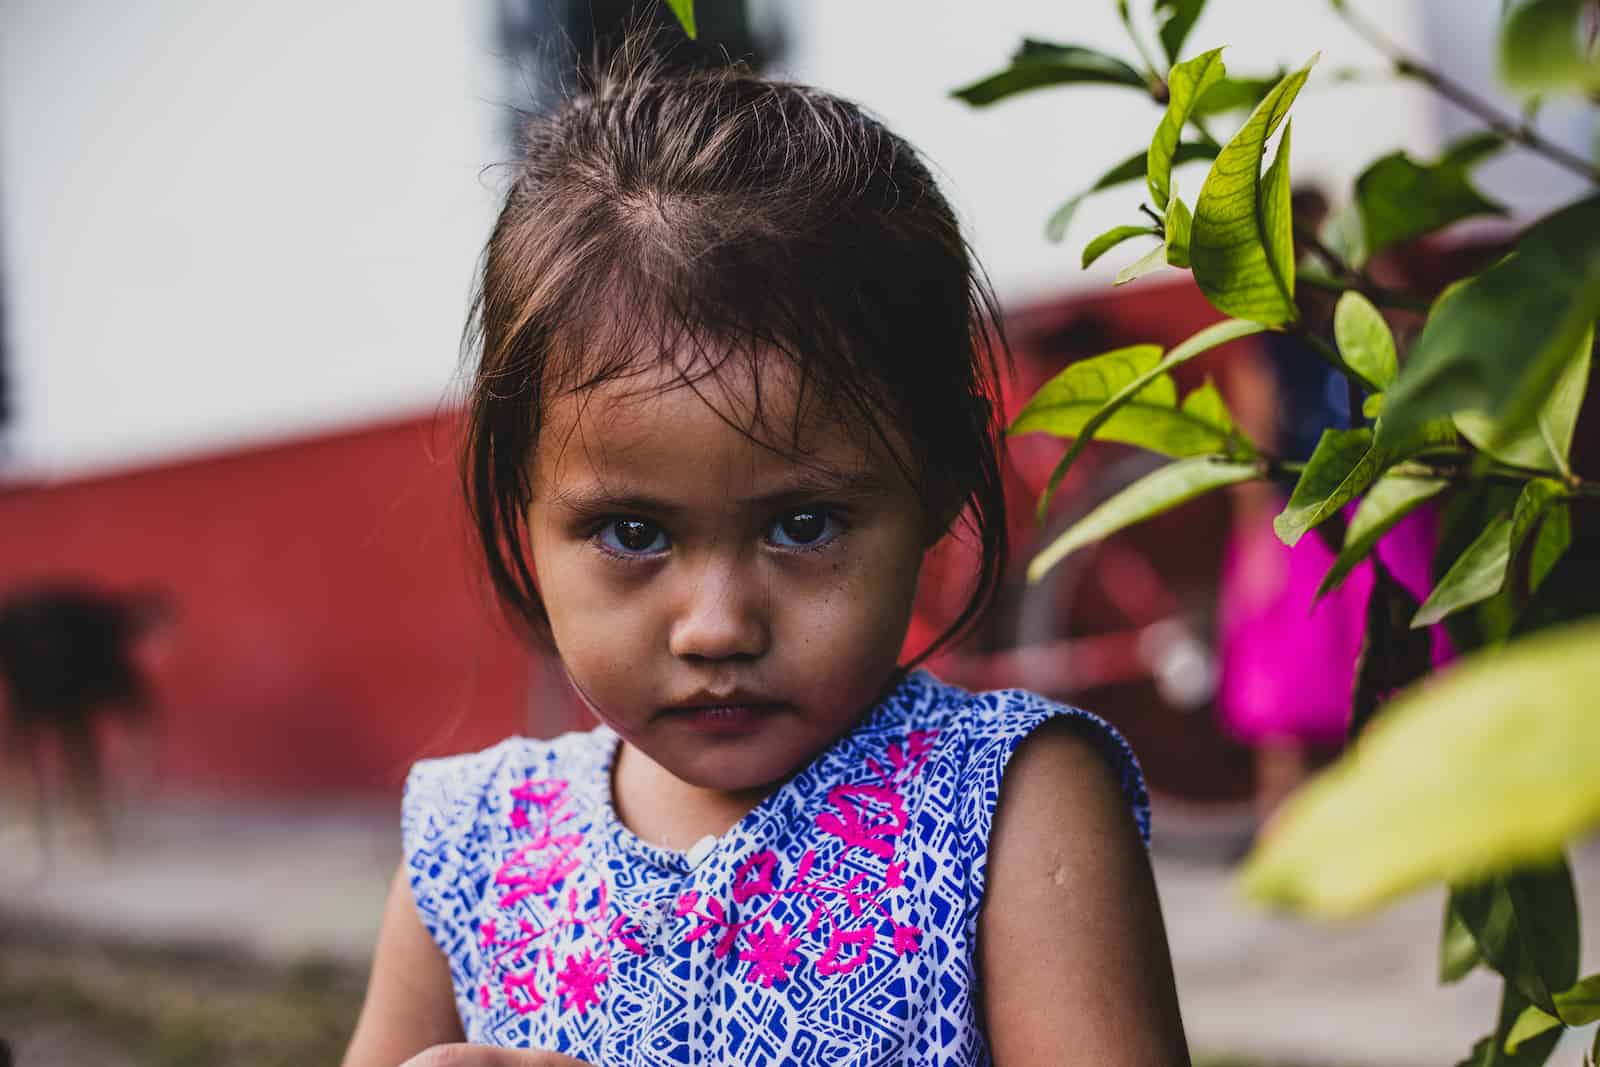 How to Help Kids in Need: A girl wearing a blue dress looks at the camera with a serious look on her face.